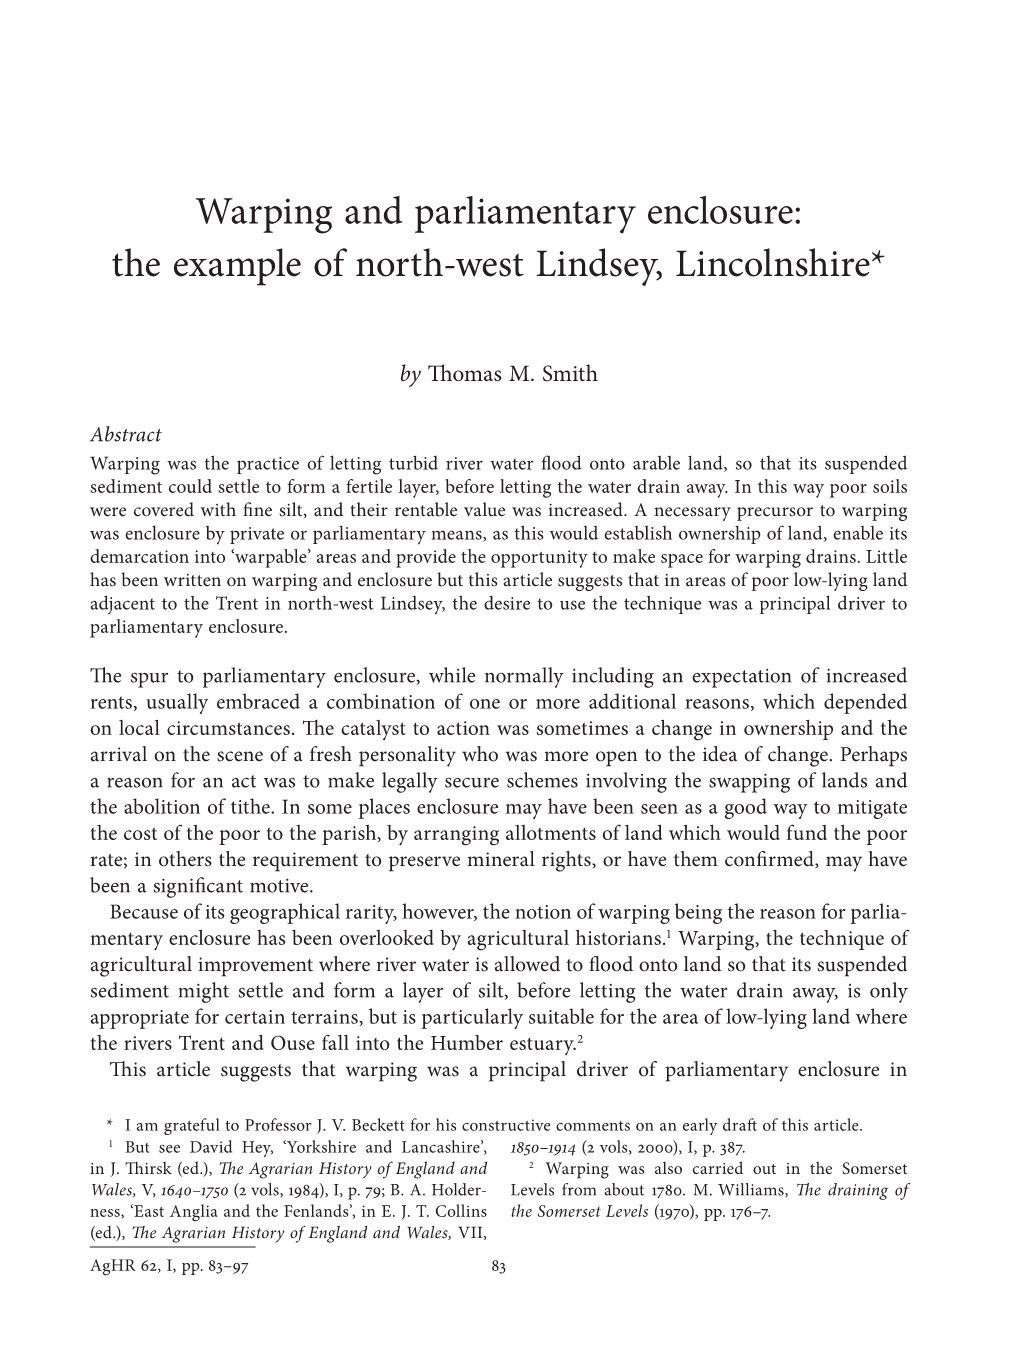 Warping and Parliamentary Enclosure: the Example of North-West Lindsey, Lincolnshire*